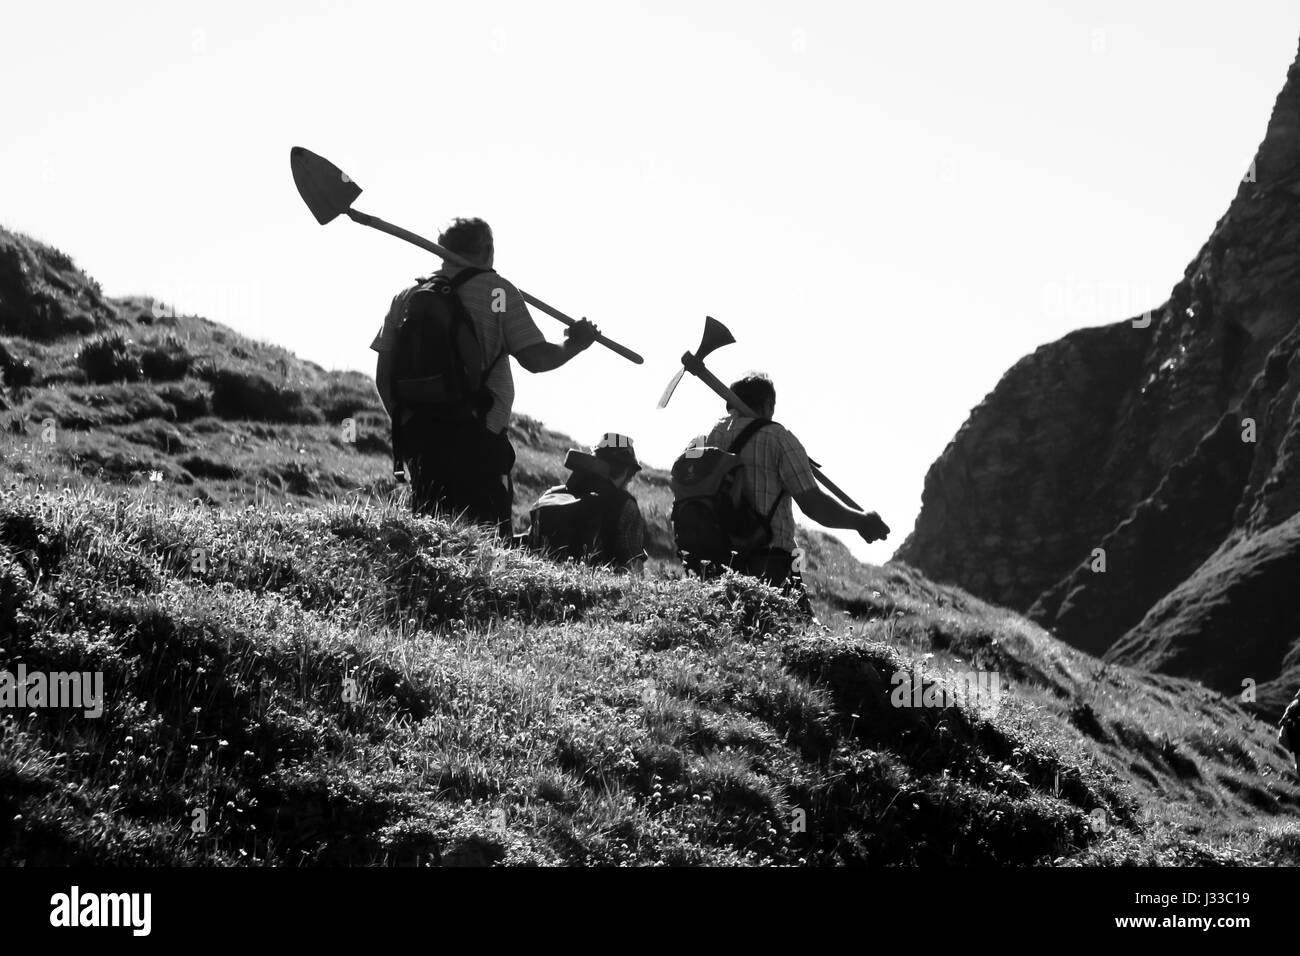 Black and white shot of workers with tools in their hands, hiking in the mountains, Oberstdorf, Germany Stock Photo